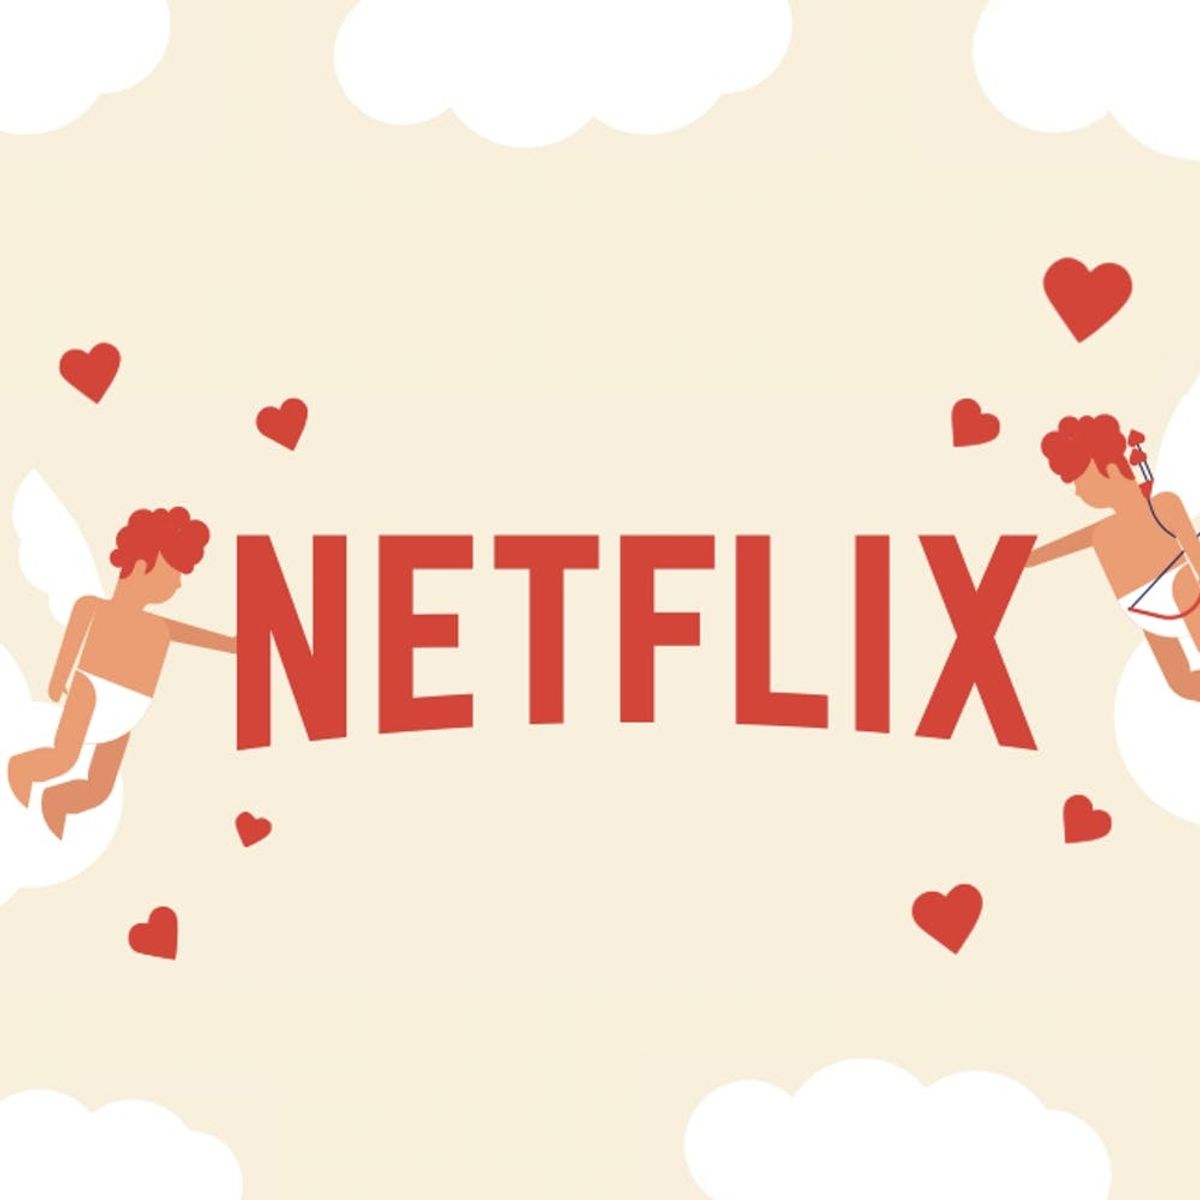 What You Watch on Netflix Can Actually Make You More Attractive